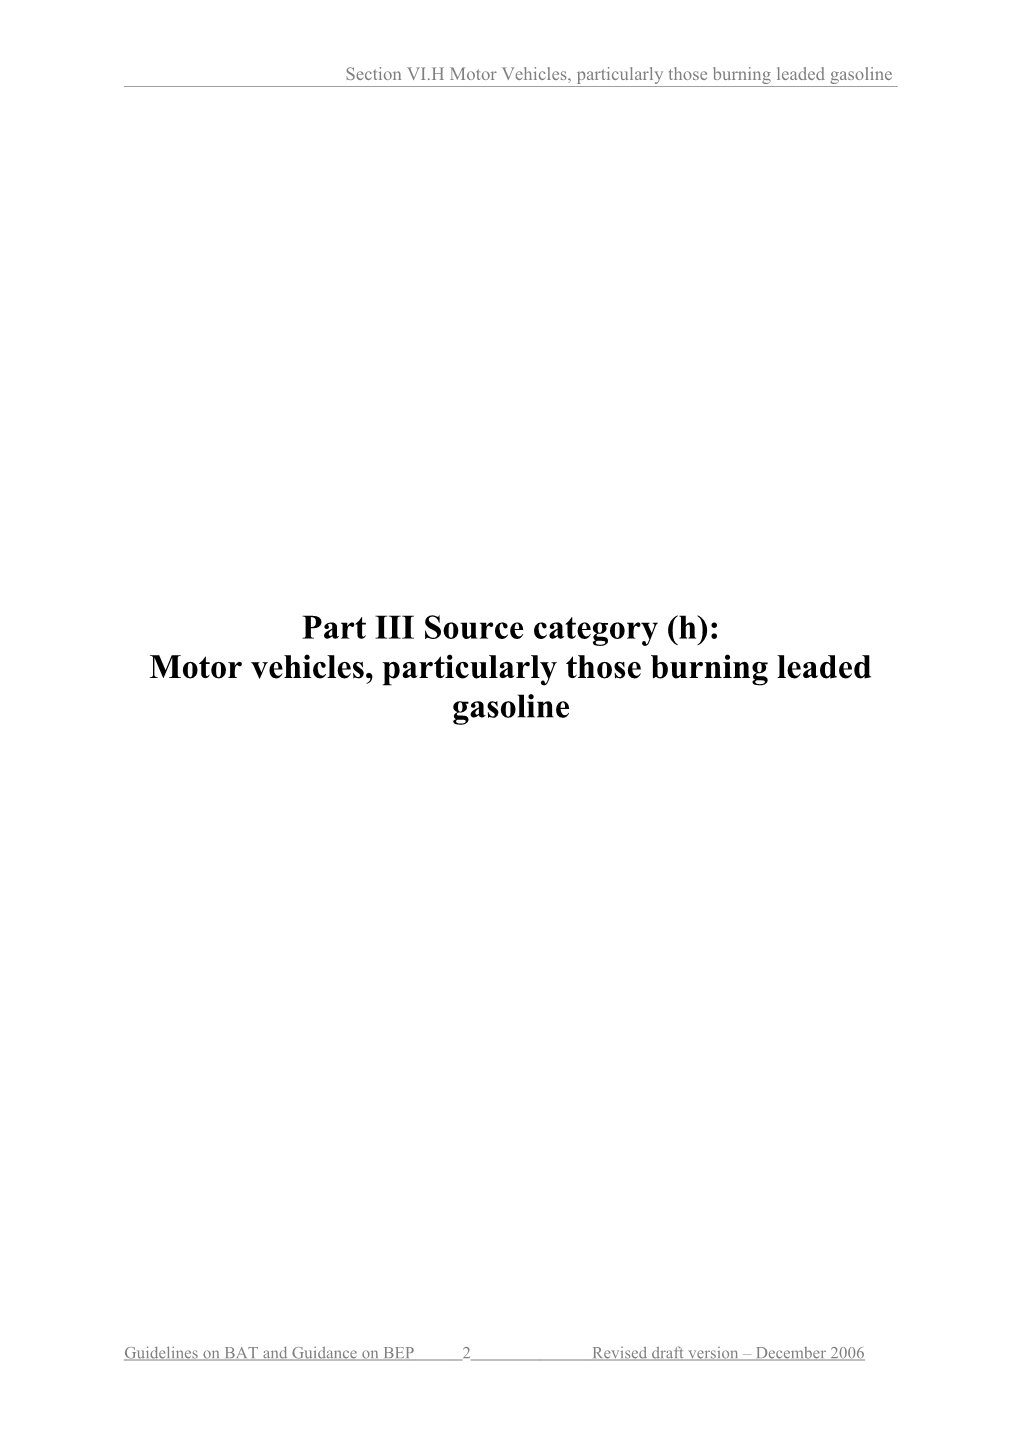 Section VI.H Motor Vehicles, Particularly Those Burning Leaded Gasoline